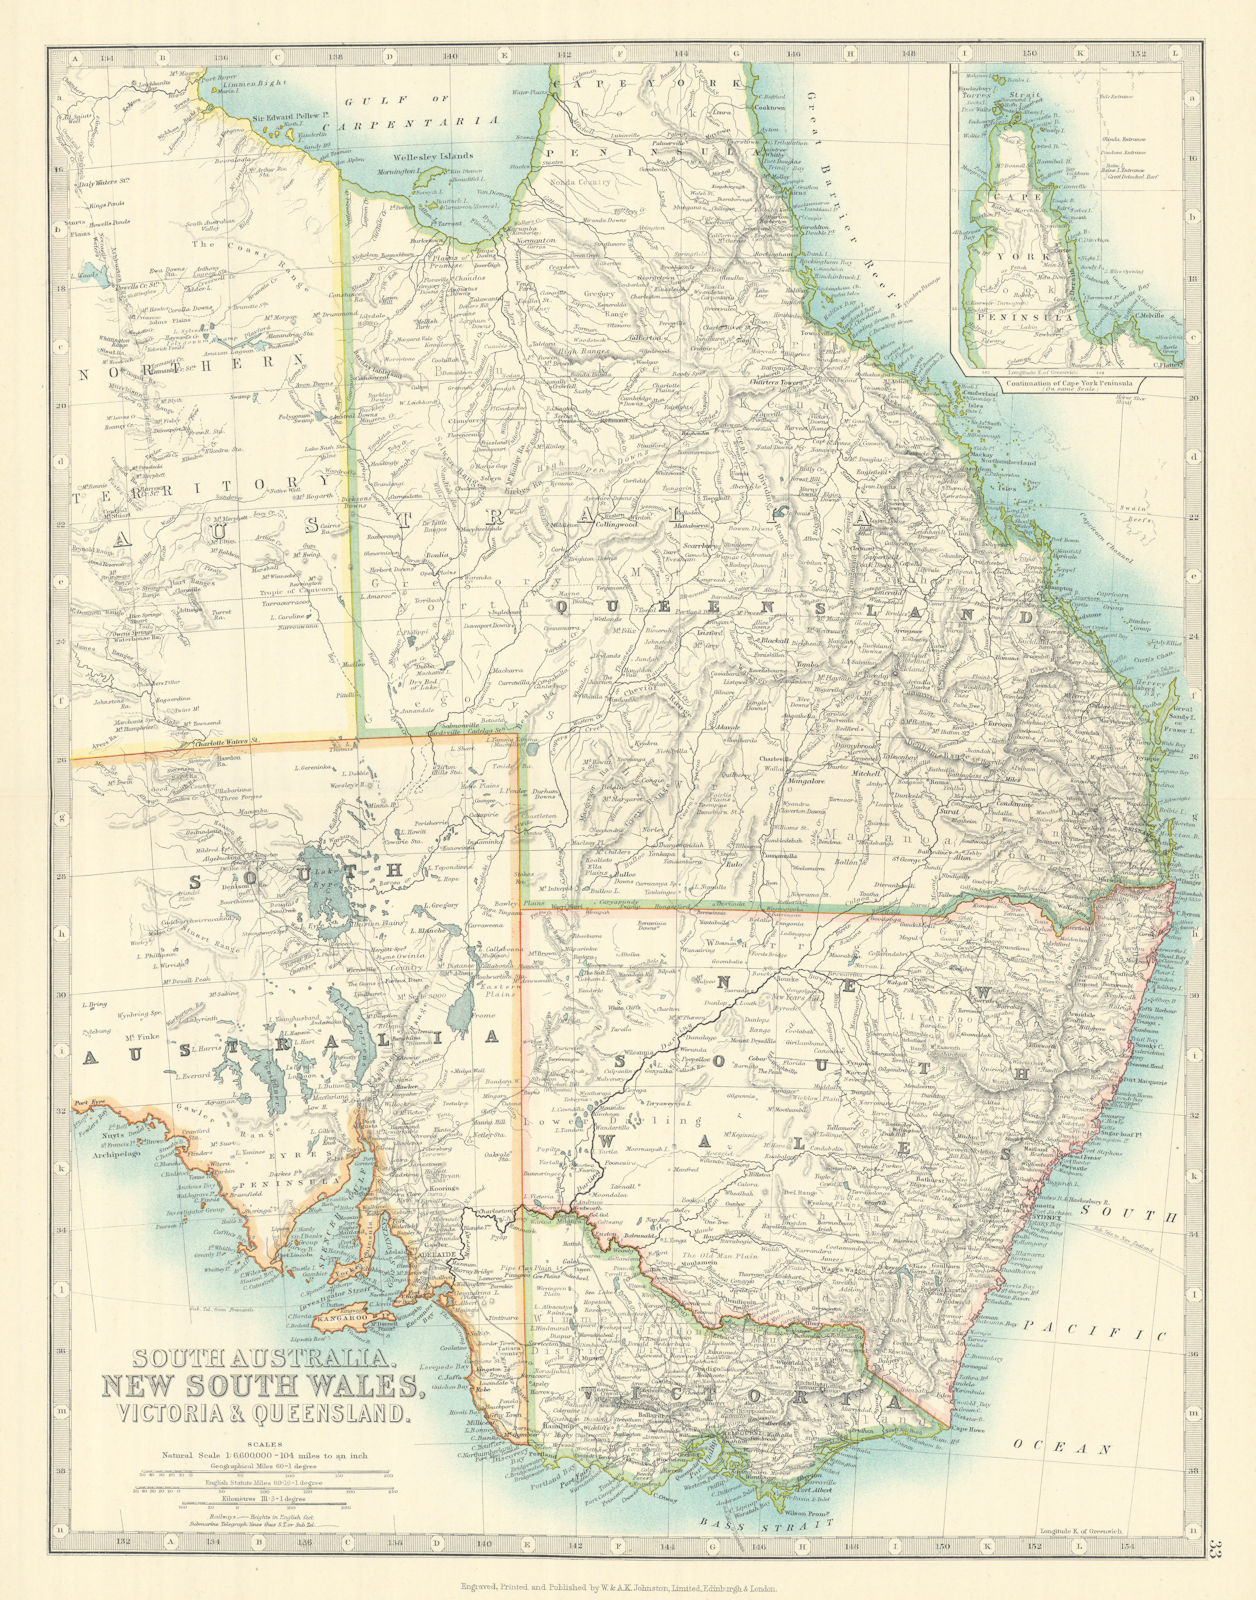 EASTERN AUSTRALIA. Queensland, New South Wales & Victoria. JOHNSTON 1913 map